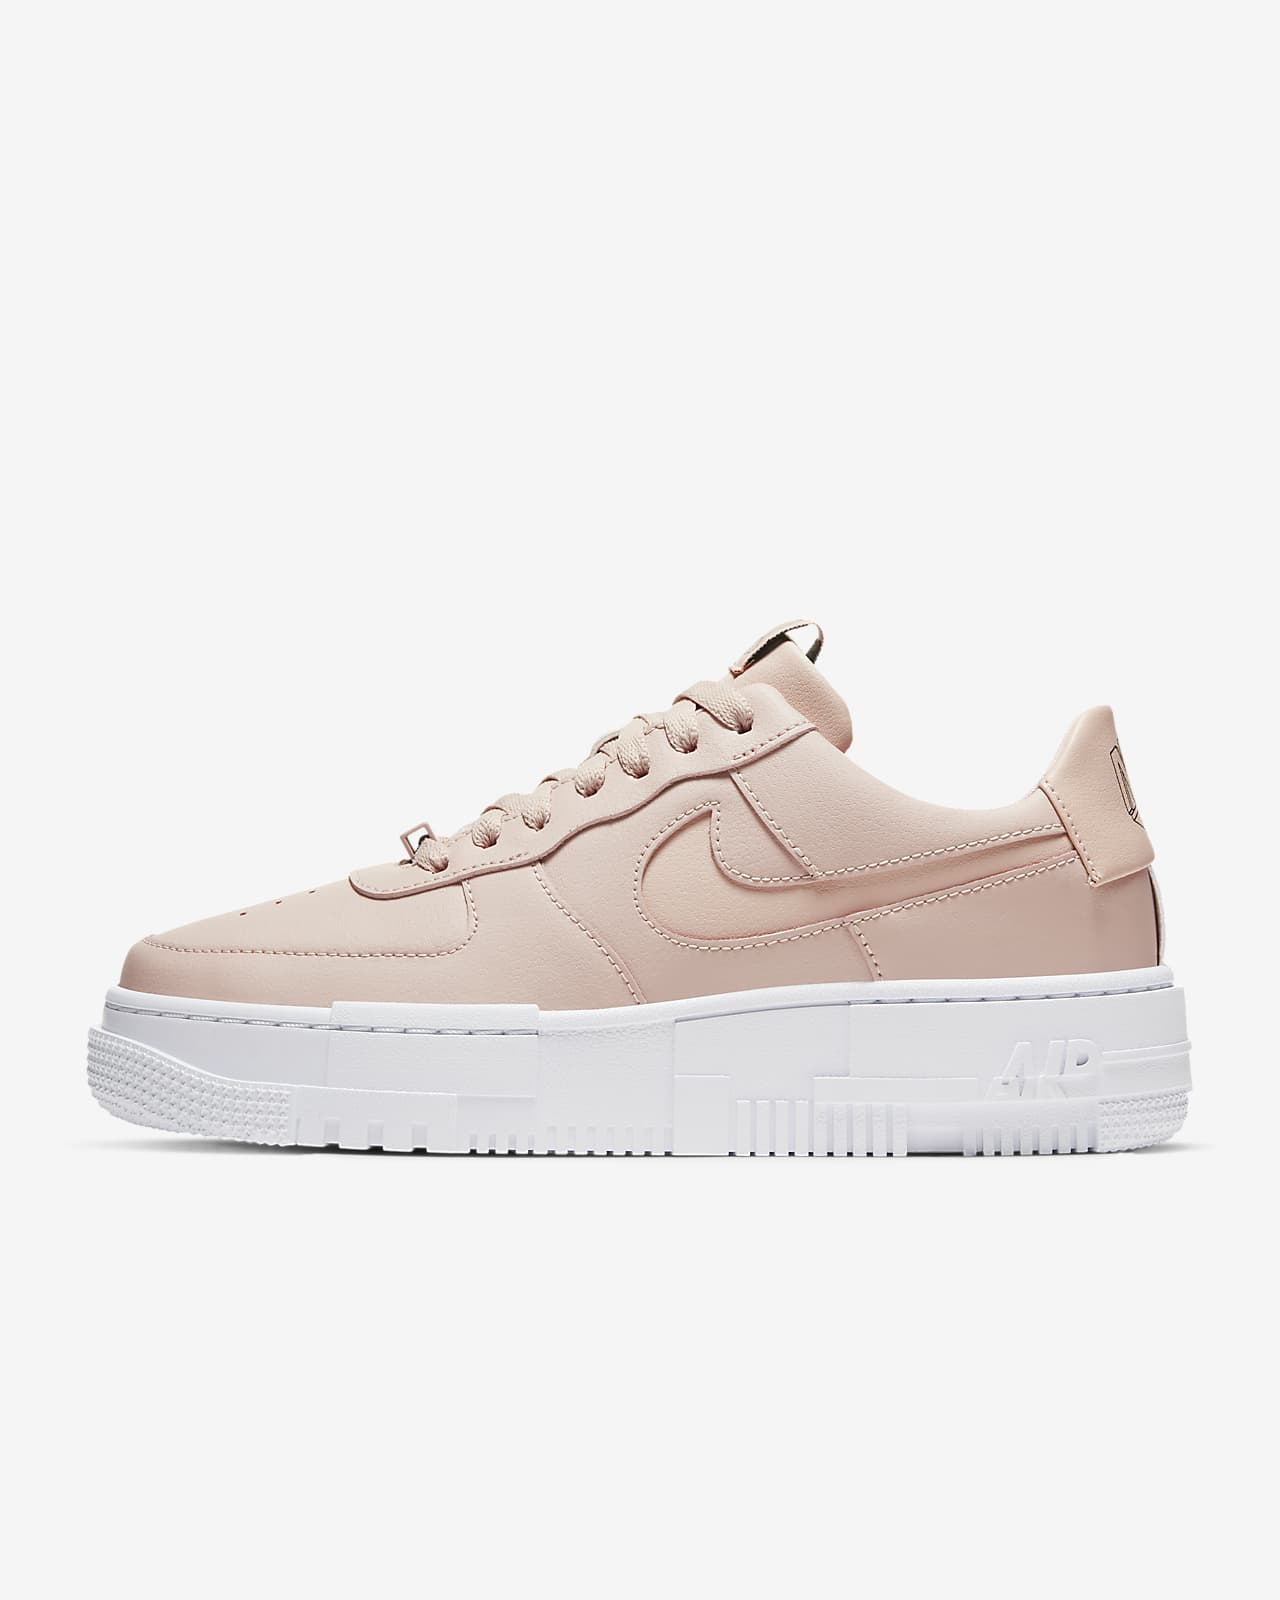 nike air force 1 womens size 7.5